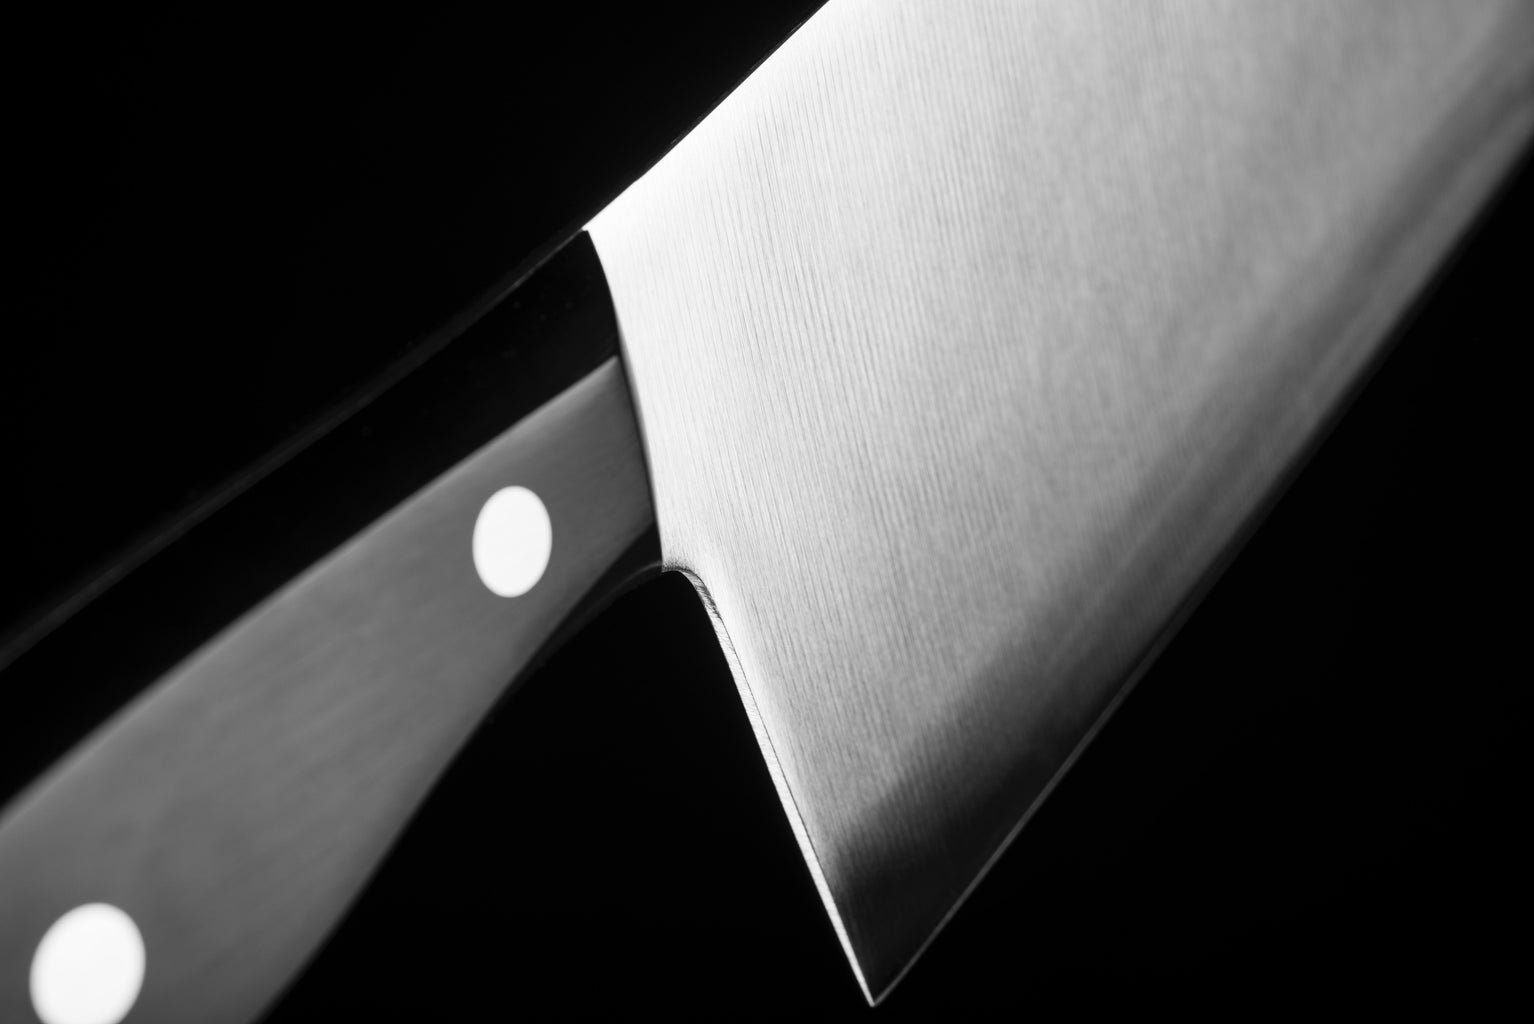 close up of a knife